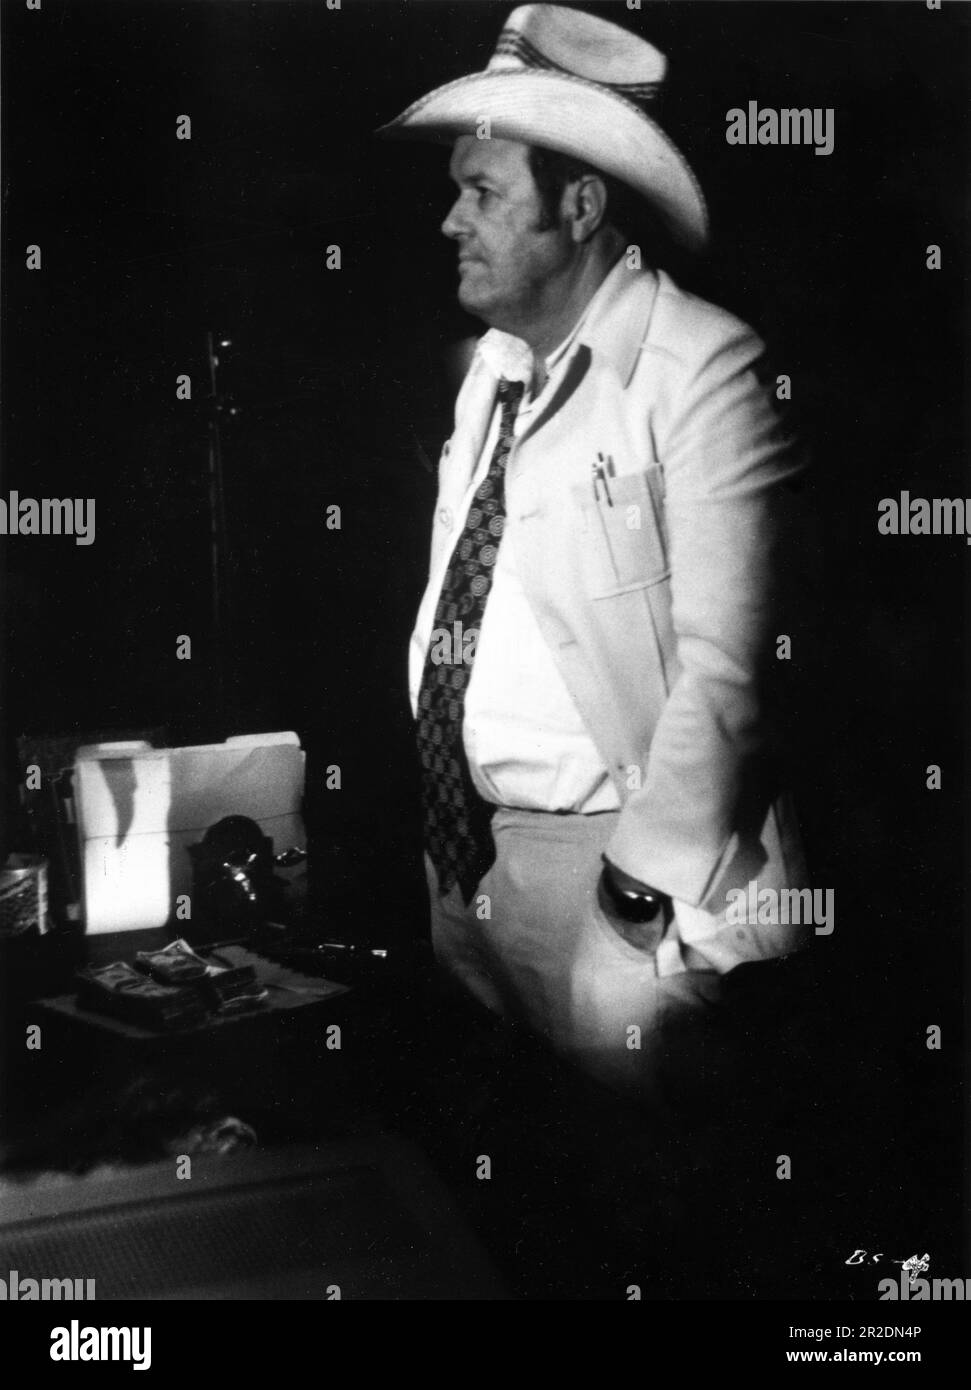 M. EMMET WALSH in BLOOD SIMPLE 1984 directors / writers JOEL COEN and ETHAN COEN music Carter Burwell River Road Productions / Foxton Entertainment / Circle Films Stock Photo